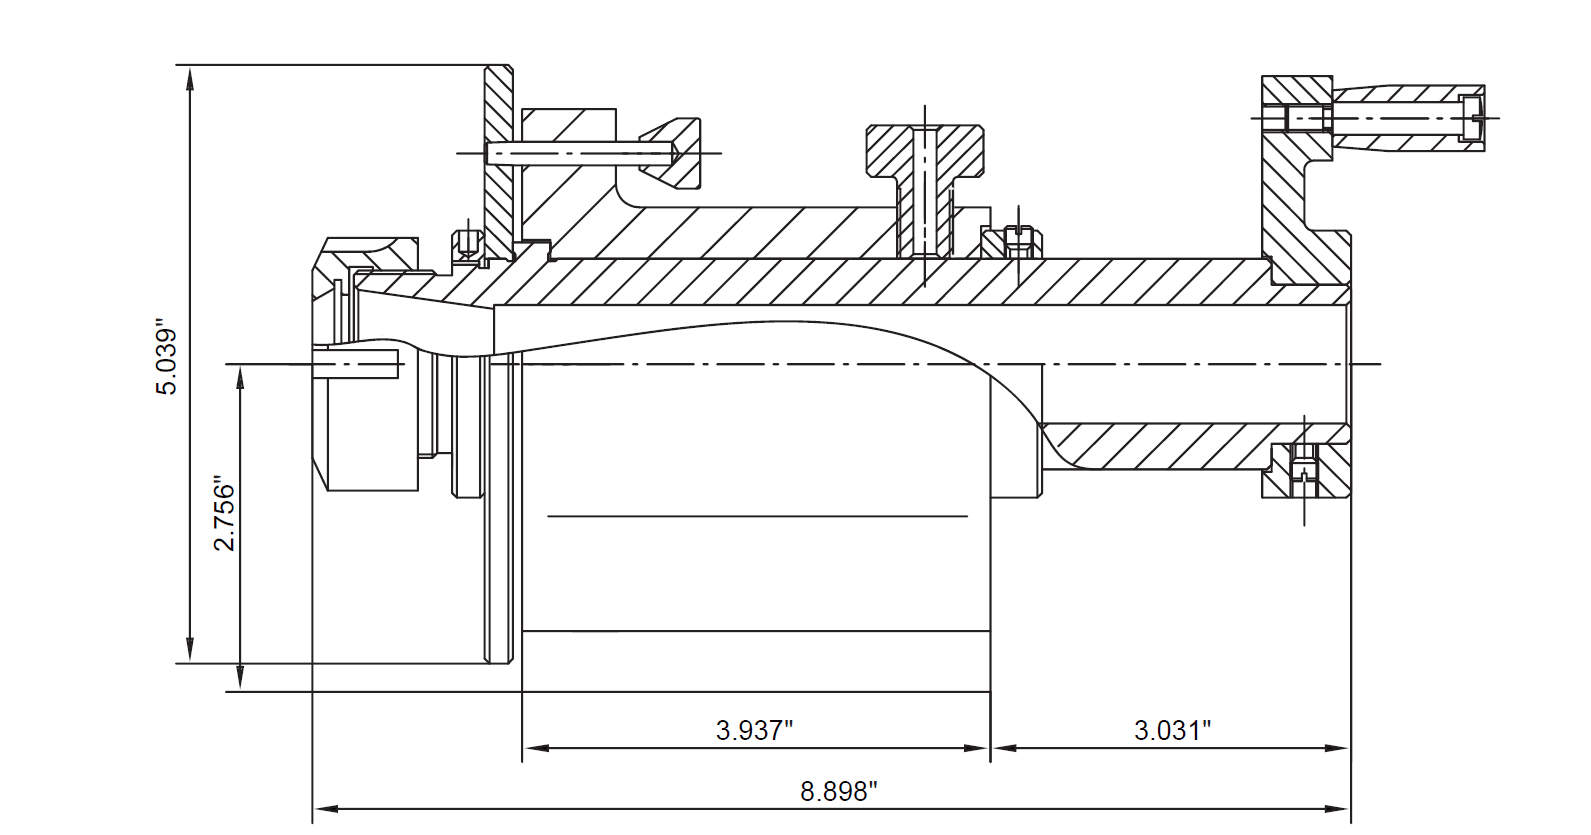 Diagram of Accusize 0225-0206 ER32 Collet Index Jig for Milling Machines